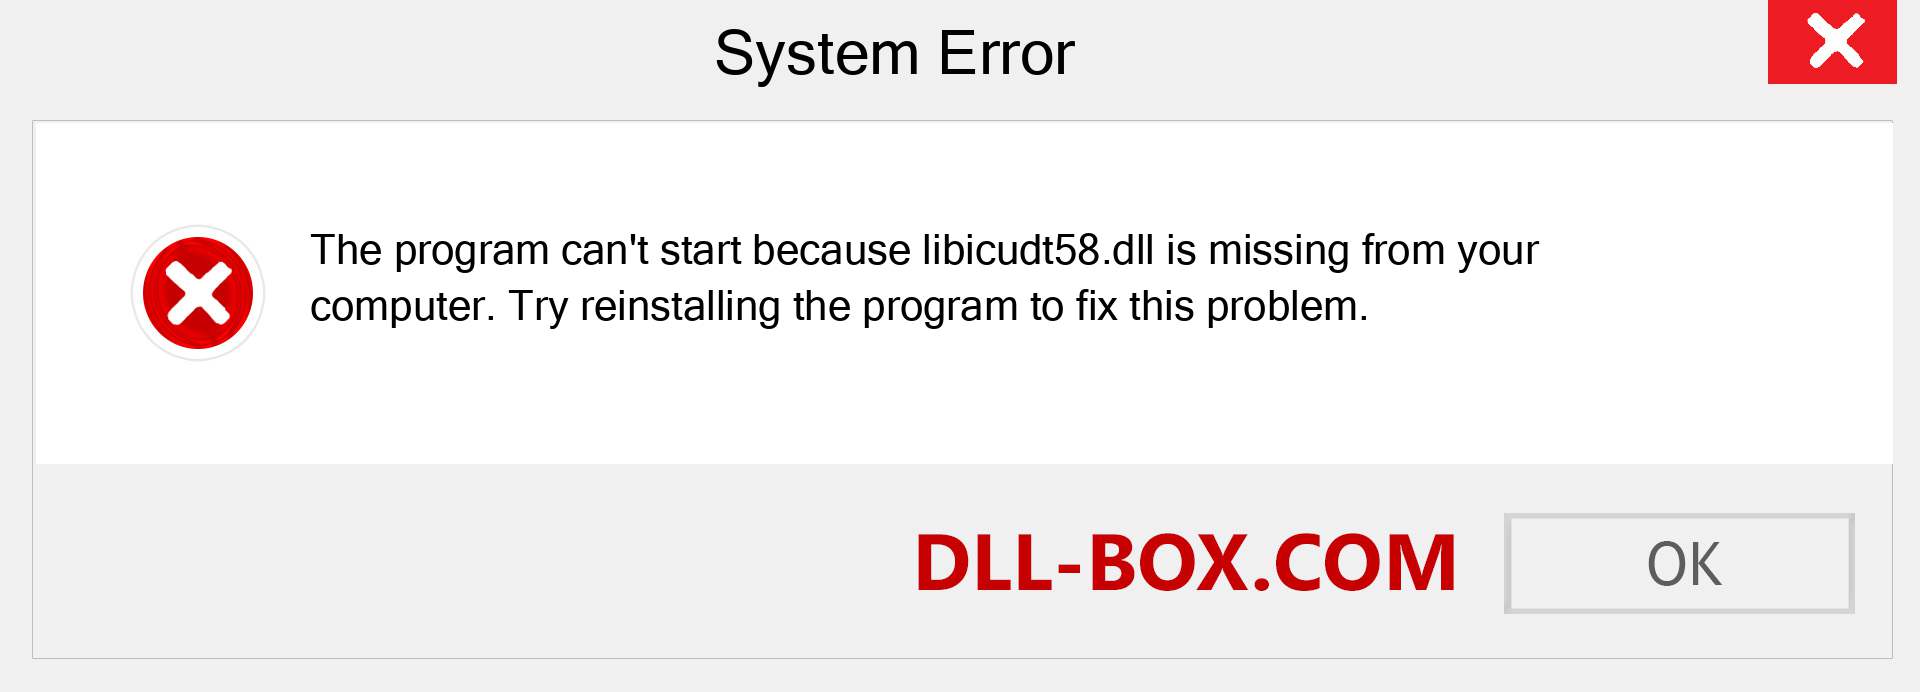  libicudt58.dll file is missing?. Download for Windows 7, 8, 10 - Fix  libicudt58 dll Missing Error on Windows, photos, images